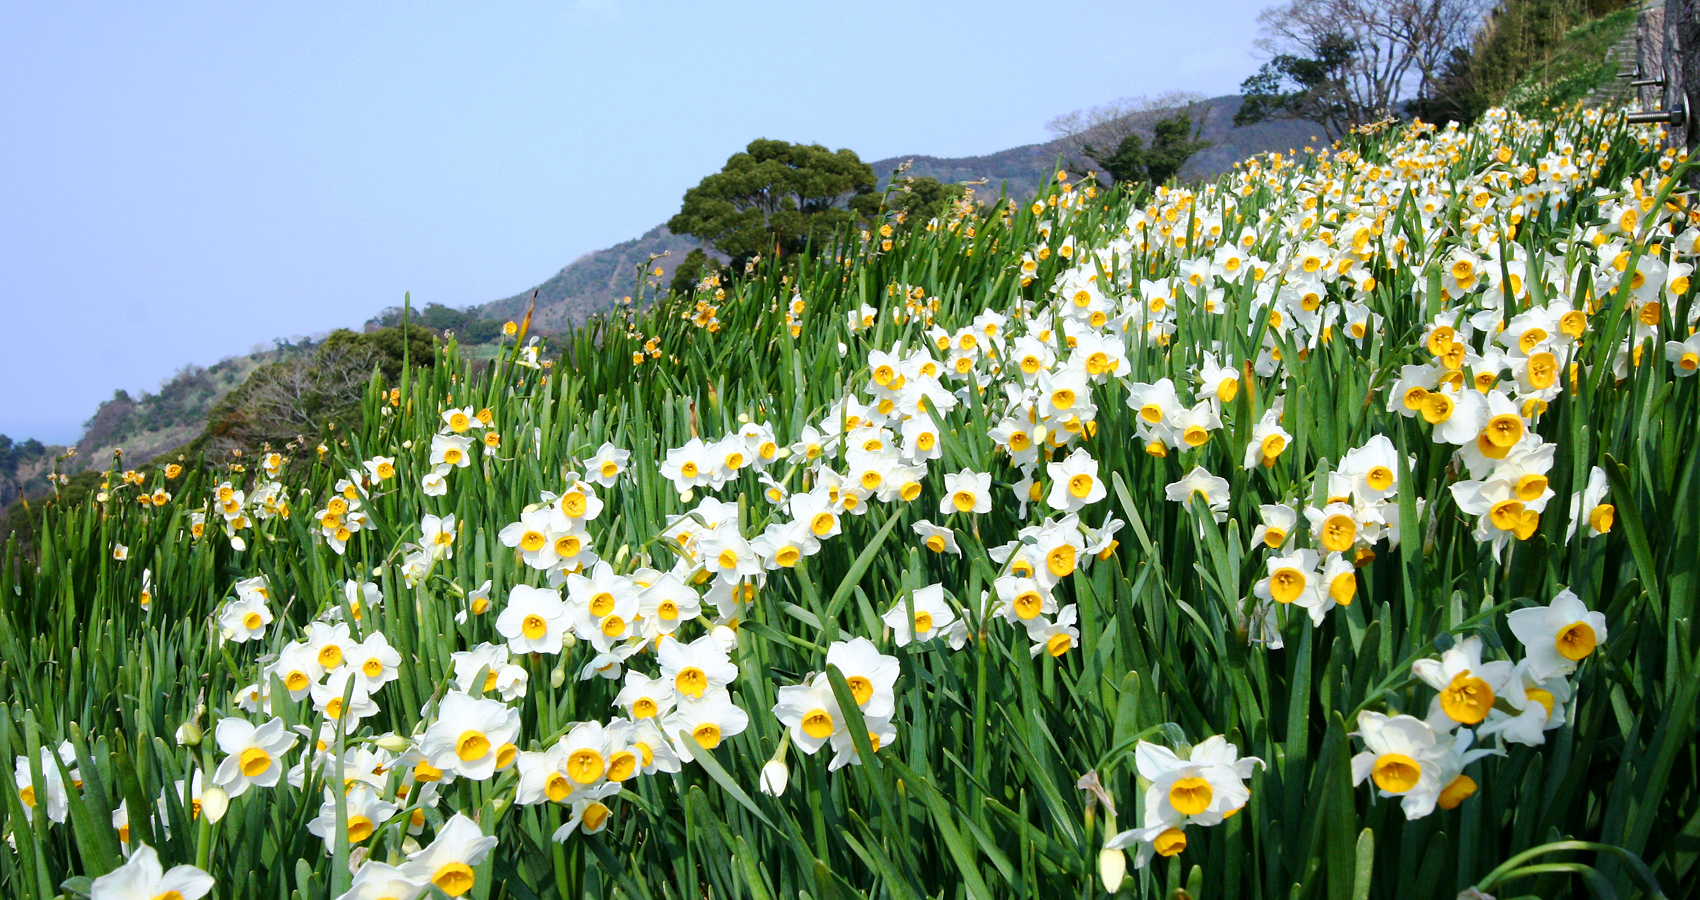 The Echizen daffodils, which bloom beautifully in the cold